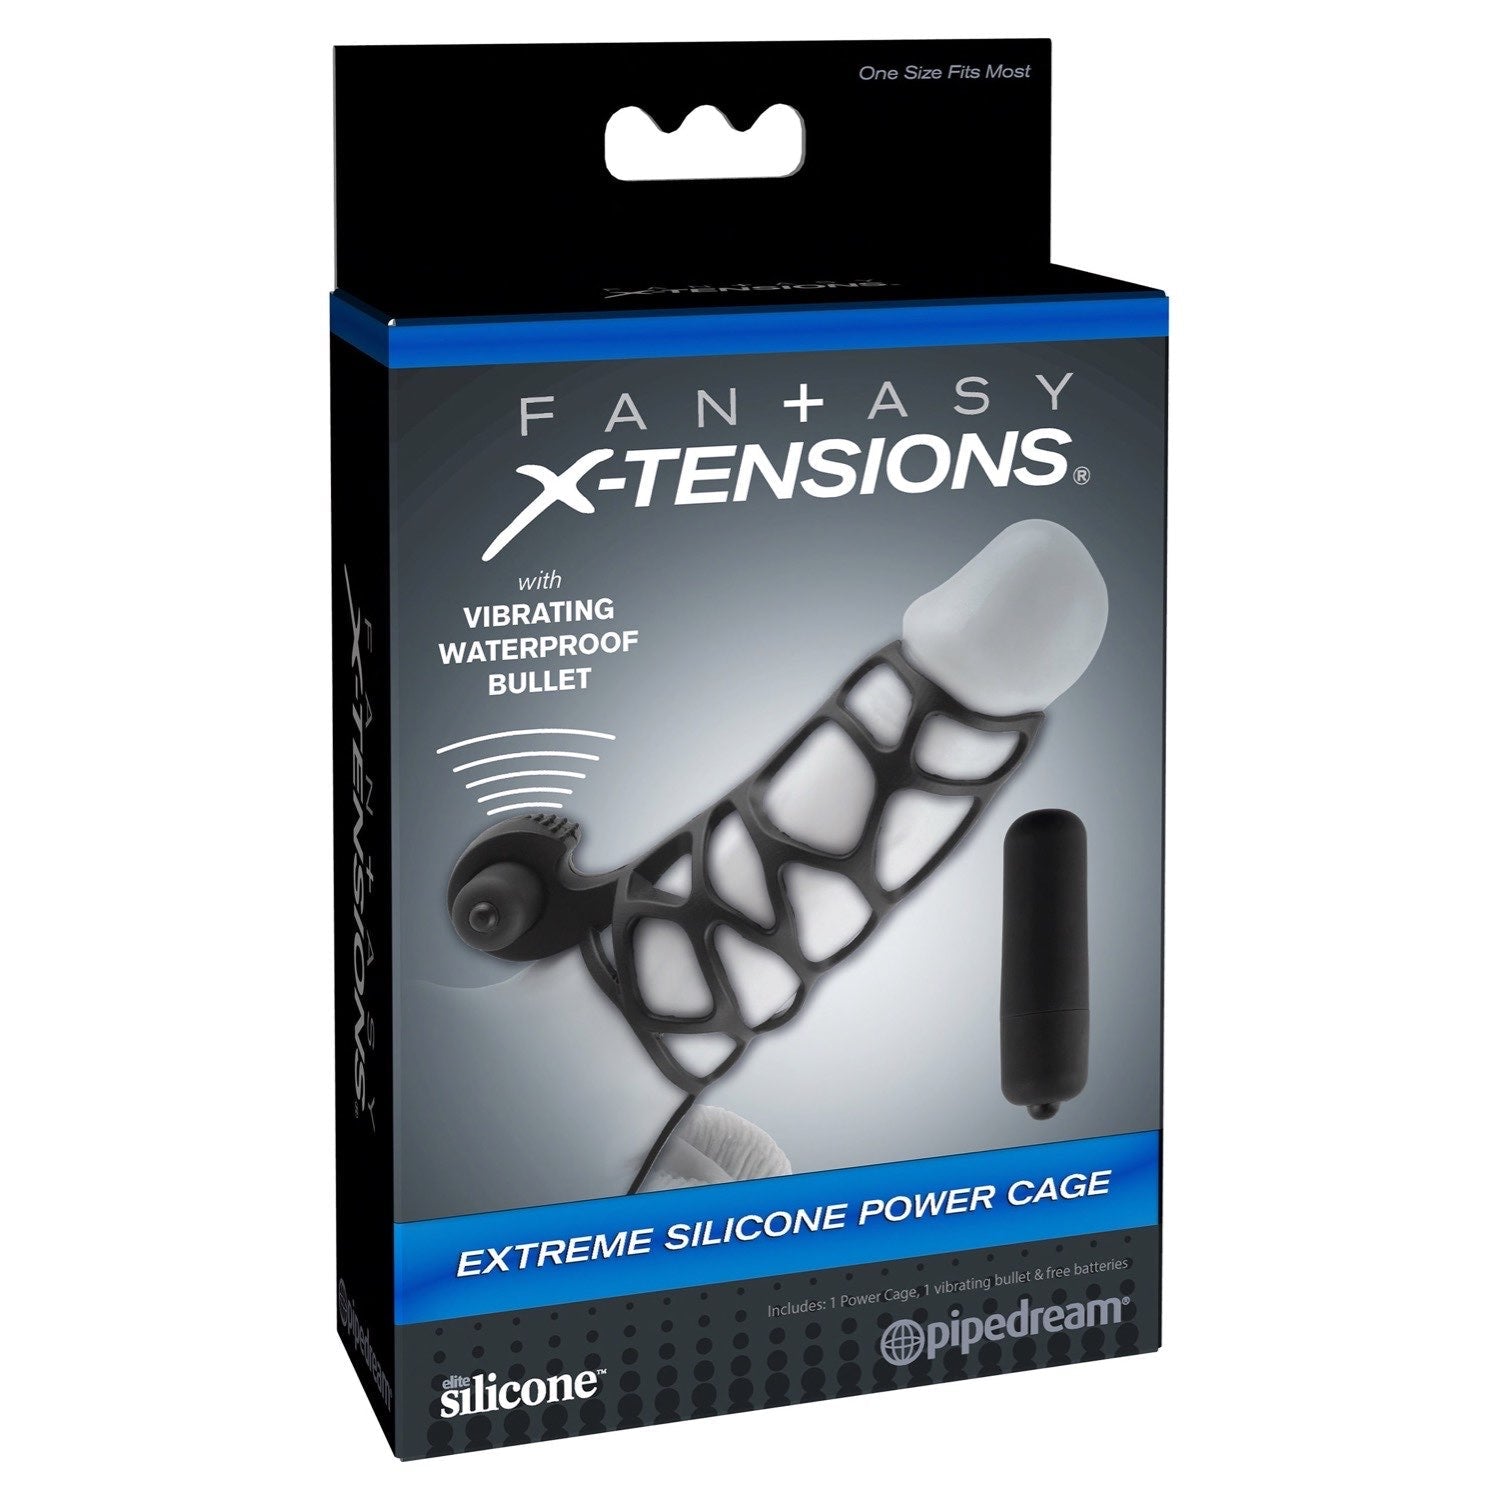 Fantasy X-Tensions Extreme Silicone Power Cage - Black Penis Sleeve with Ball Strap &amp; Vibrating Clit Stimulator by Pipedream